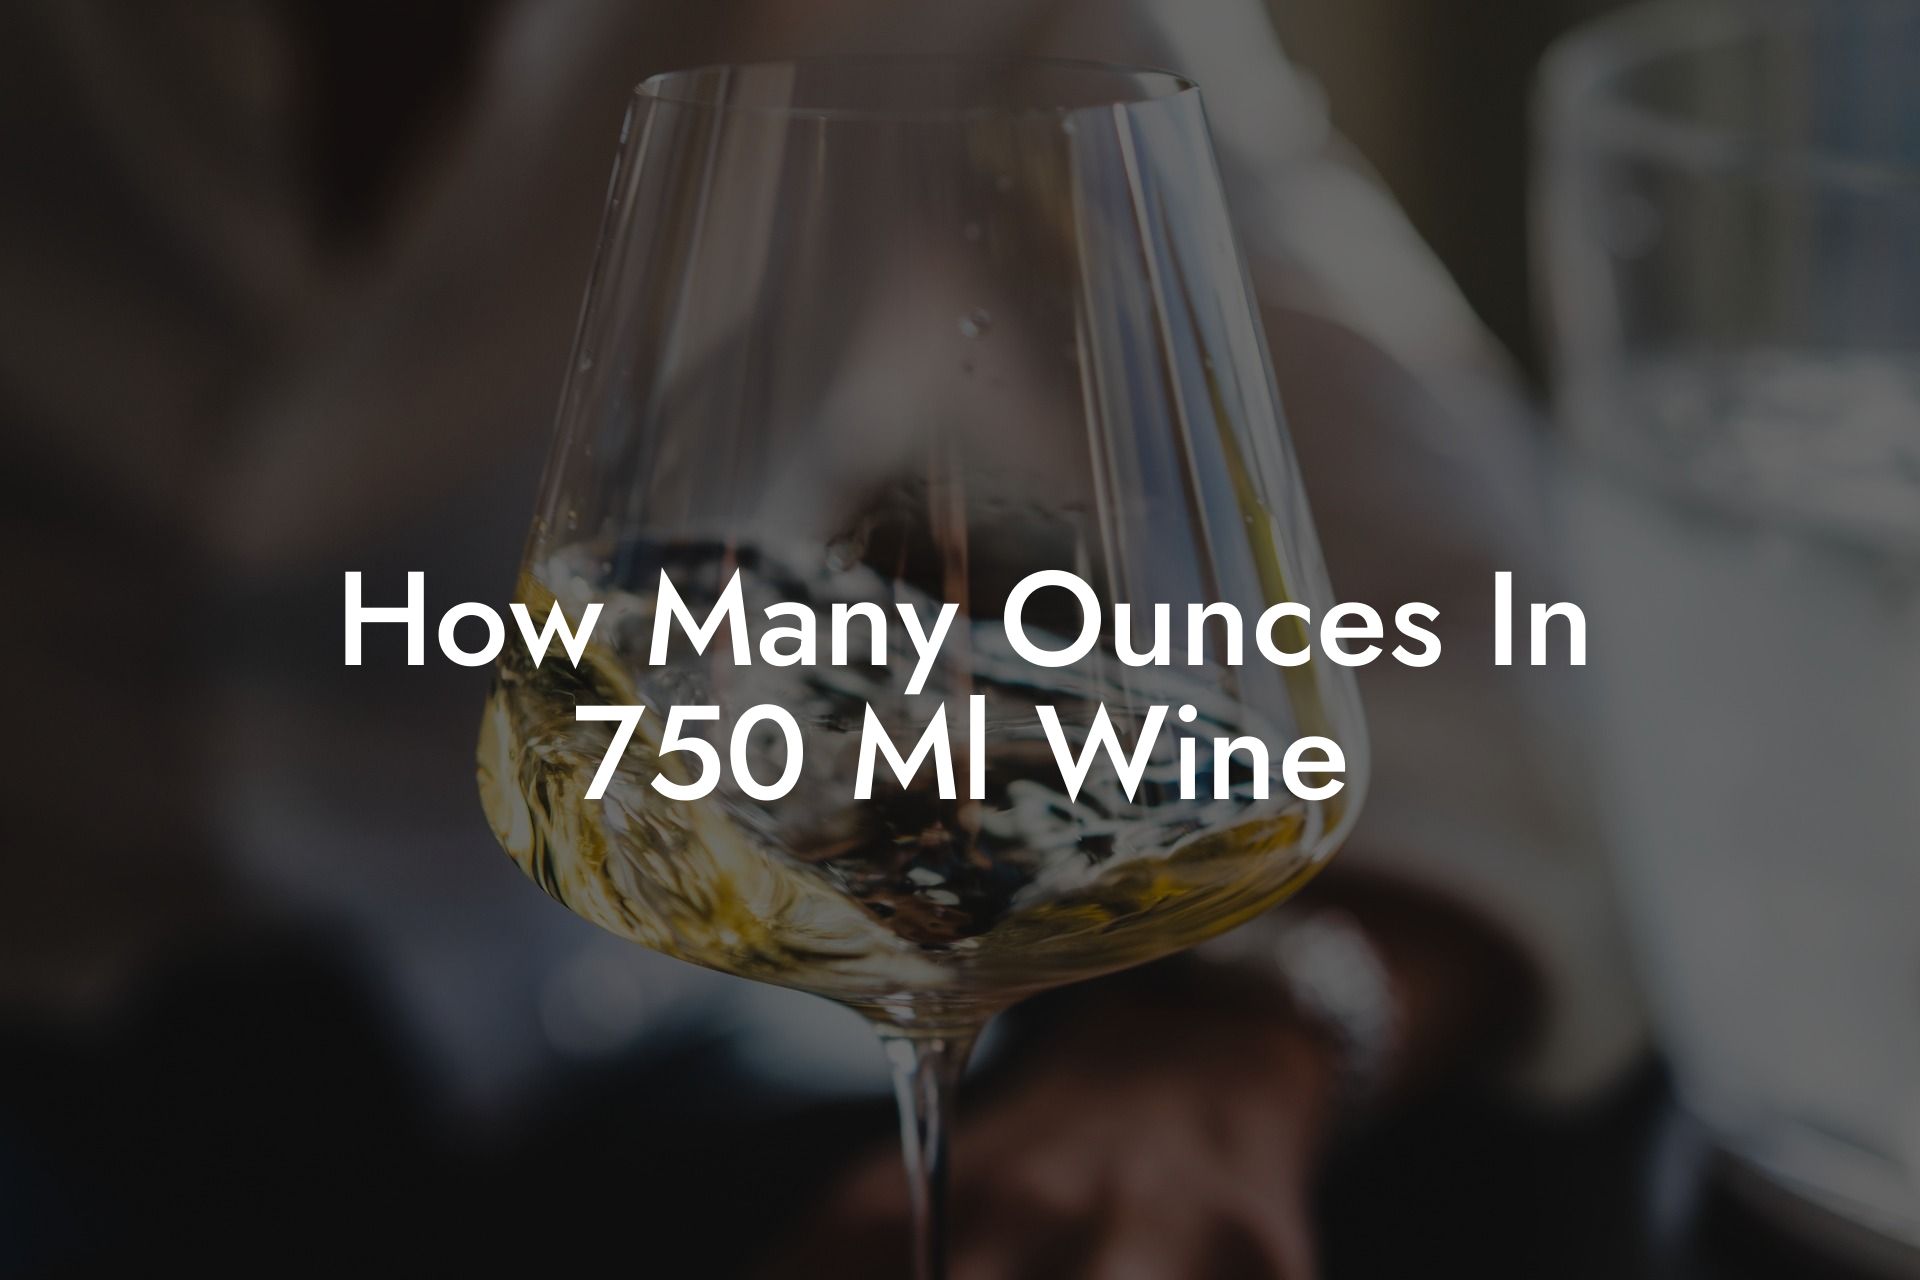 How Many Ounces In 750 Ml Wine